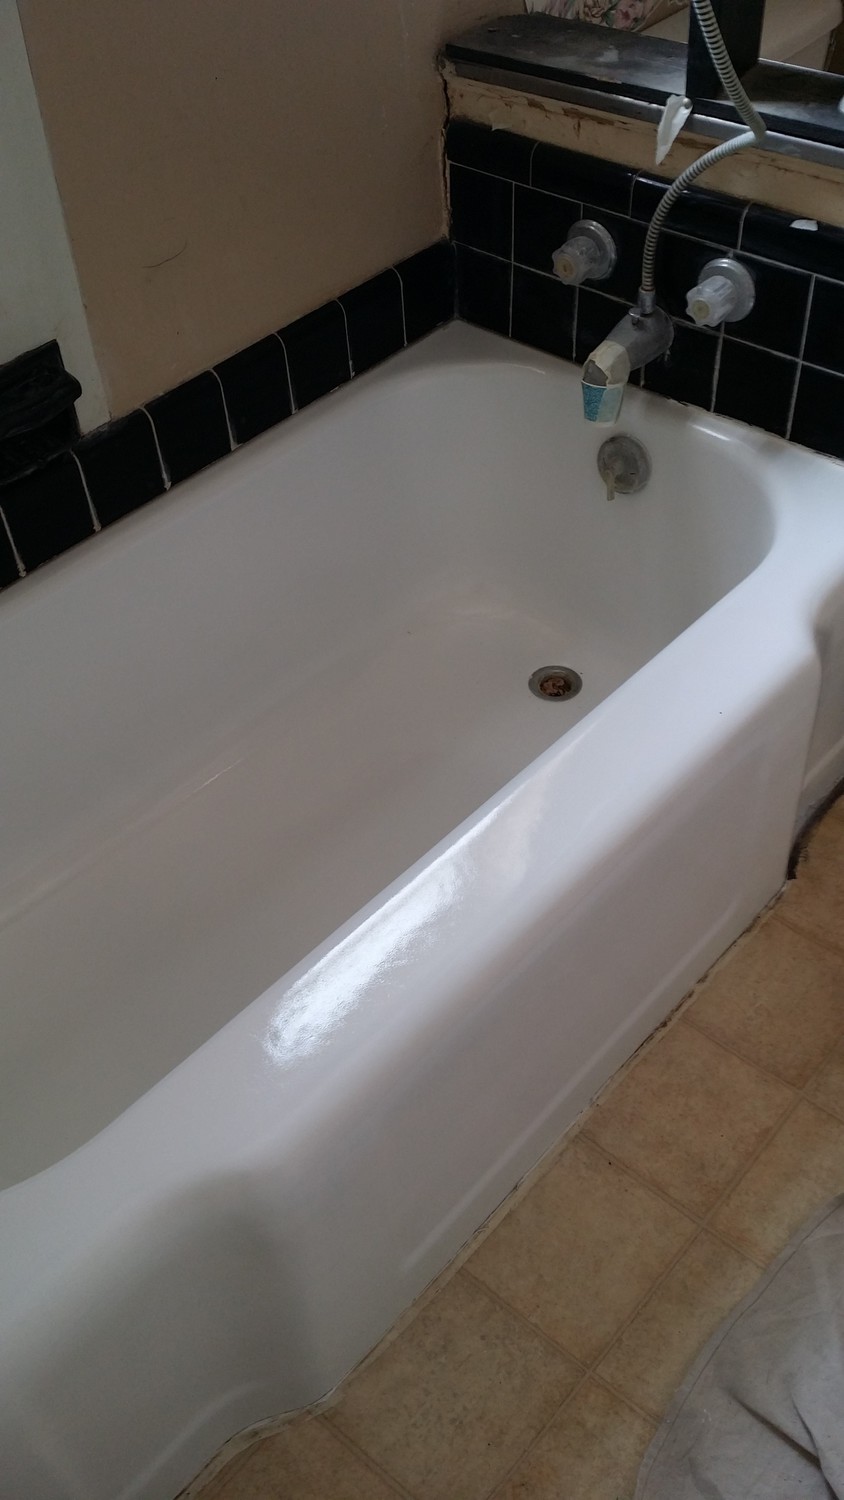 1950's cast iron bathtub repaired and refinished to a brilliant new shine and the look of new age porcelain